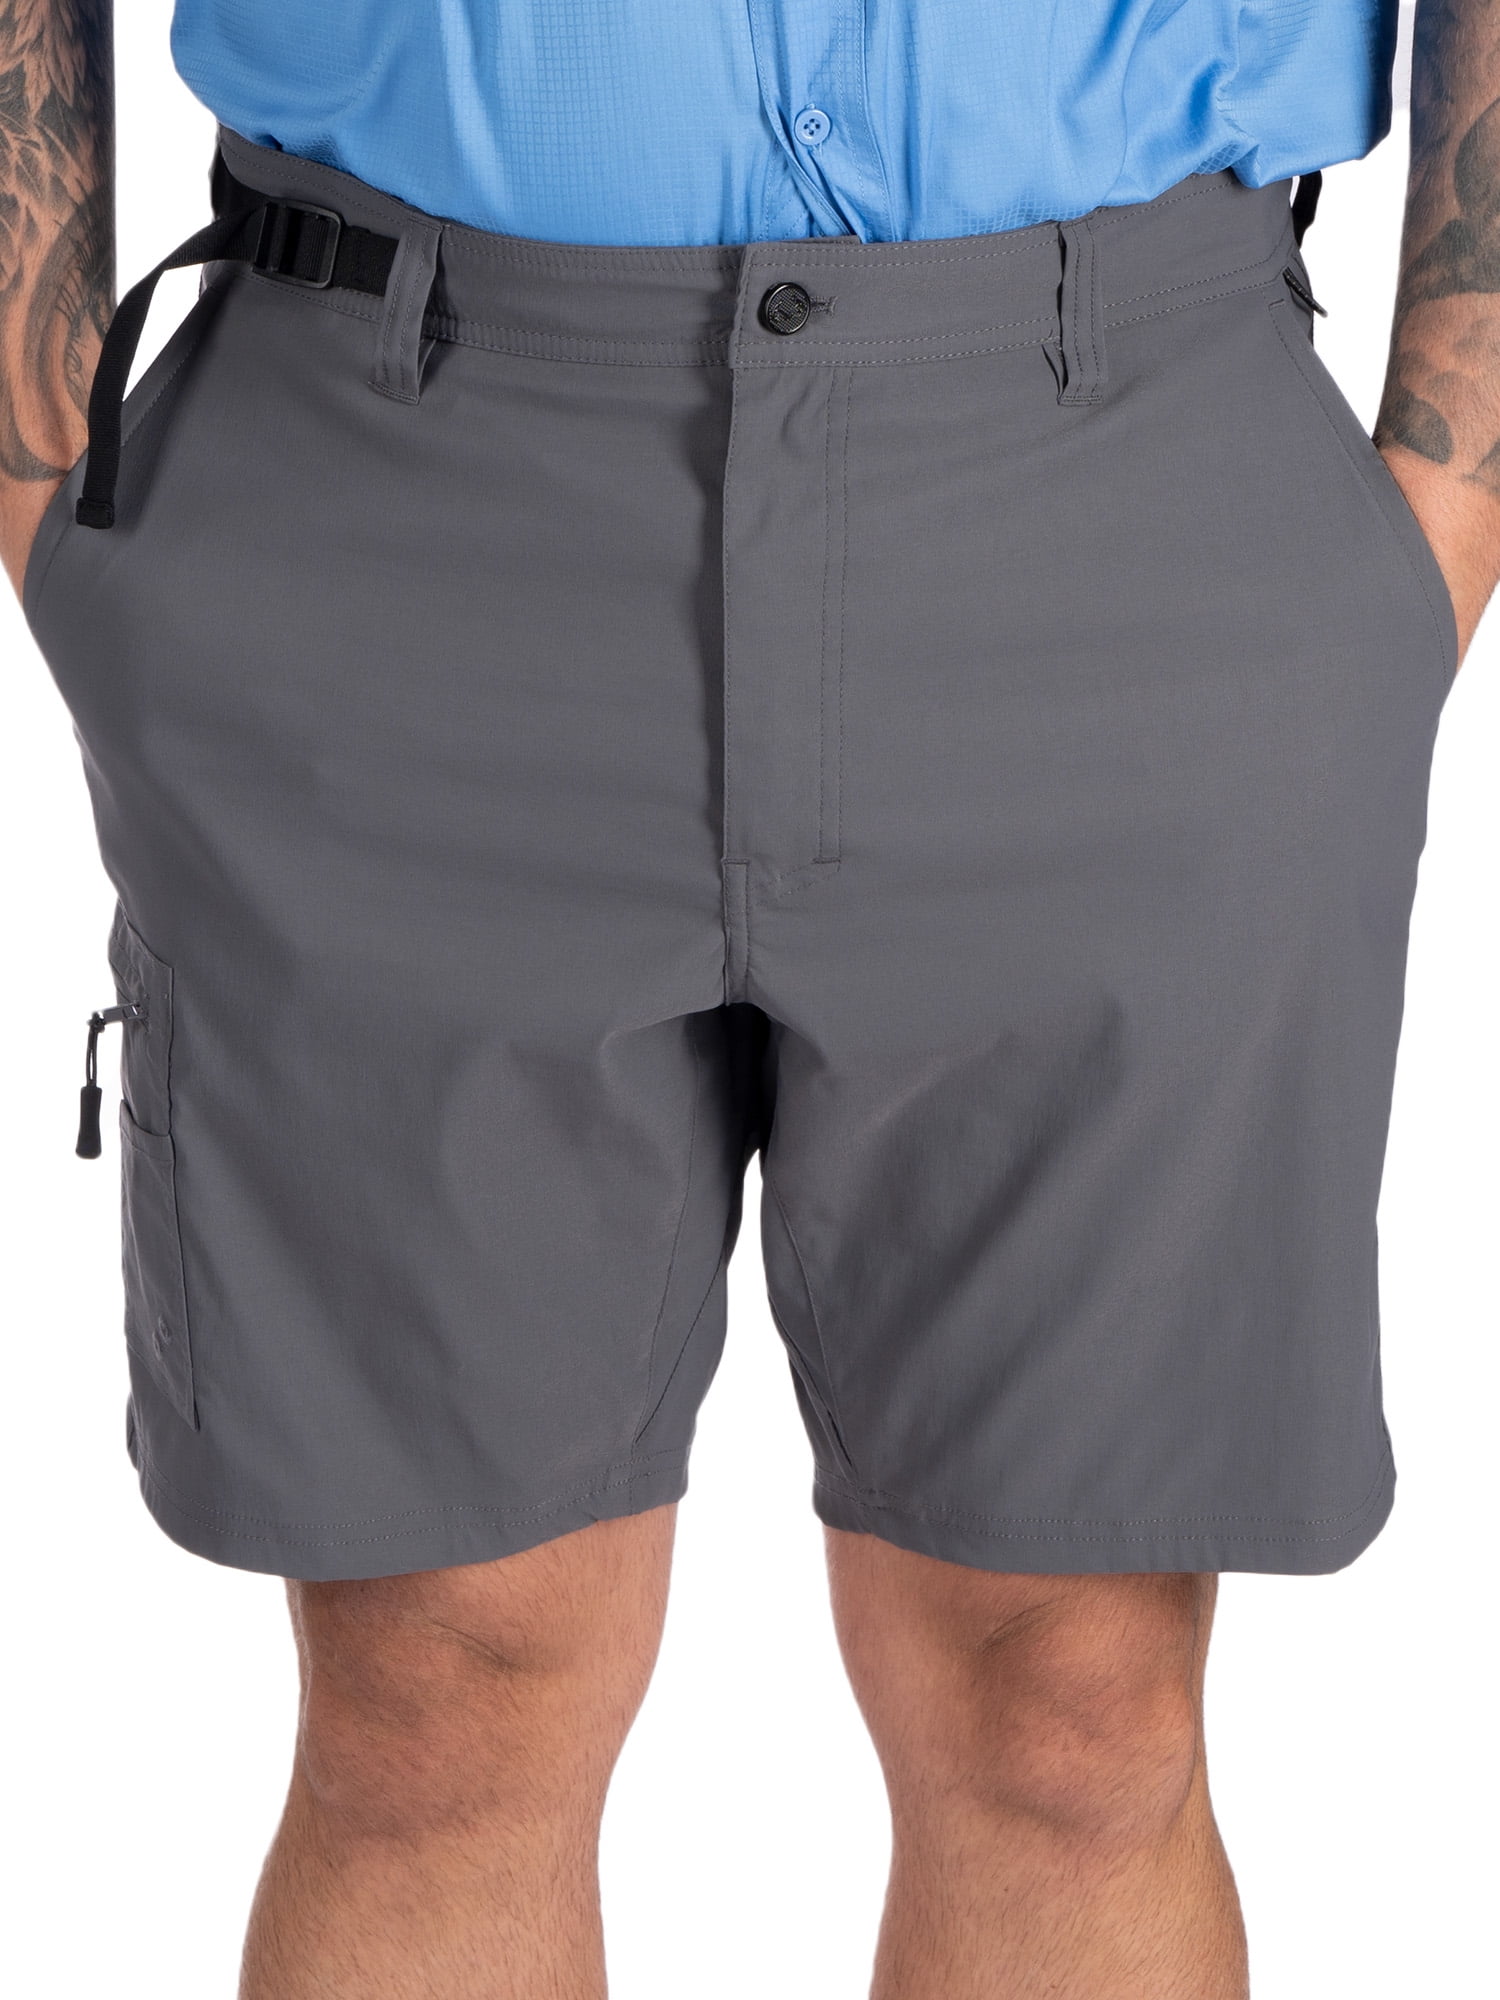 Realtree Men's Hybrid Fishing Shorts, Athletic Performance Short Pants in  Charcoal, Sizes S-3XL 